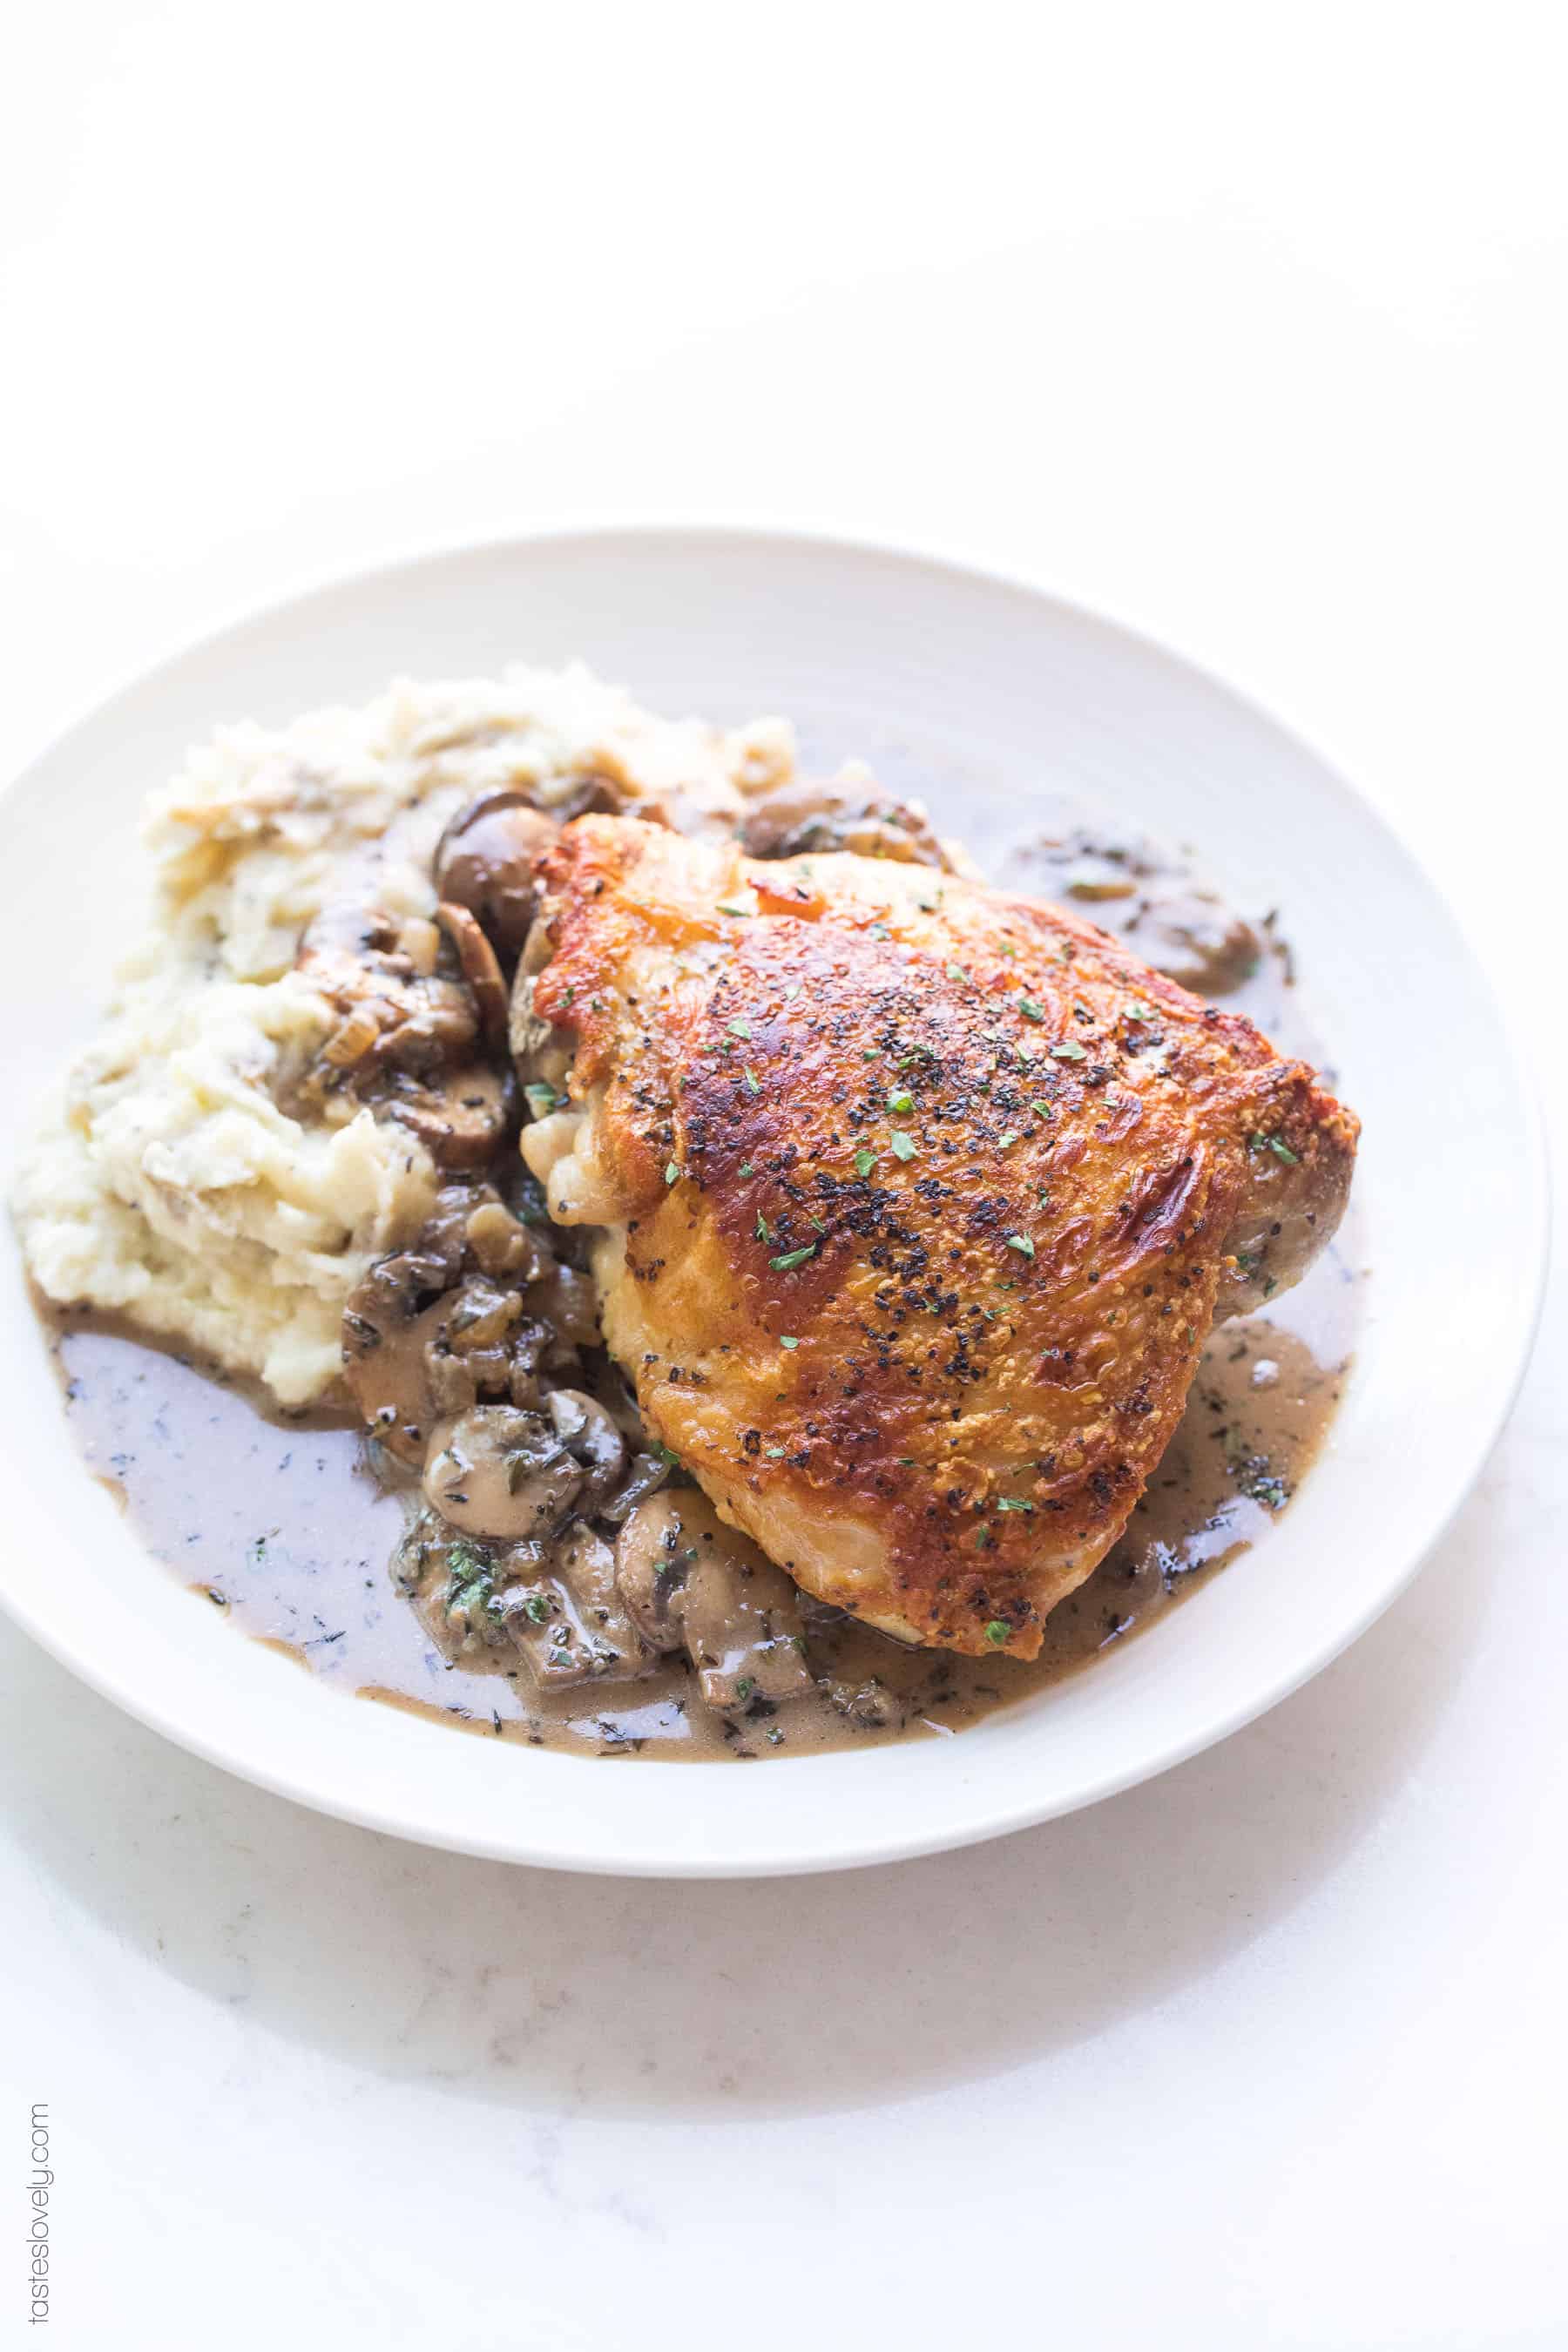 Crispy chicken thighs on a plate with mashed potatoes and creamy mushroom sauce